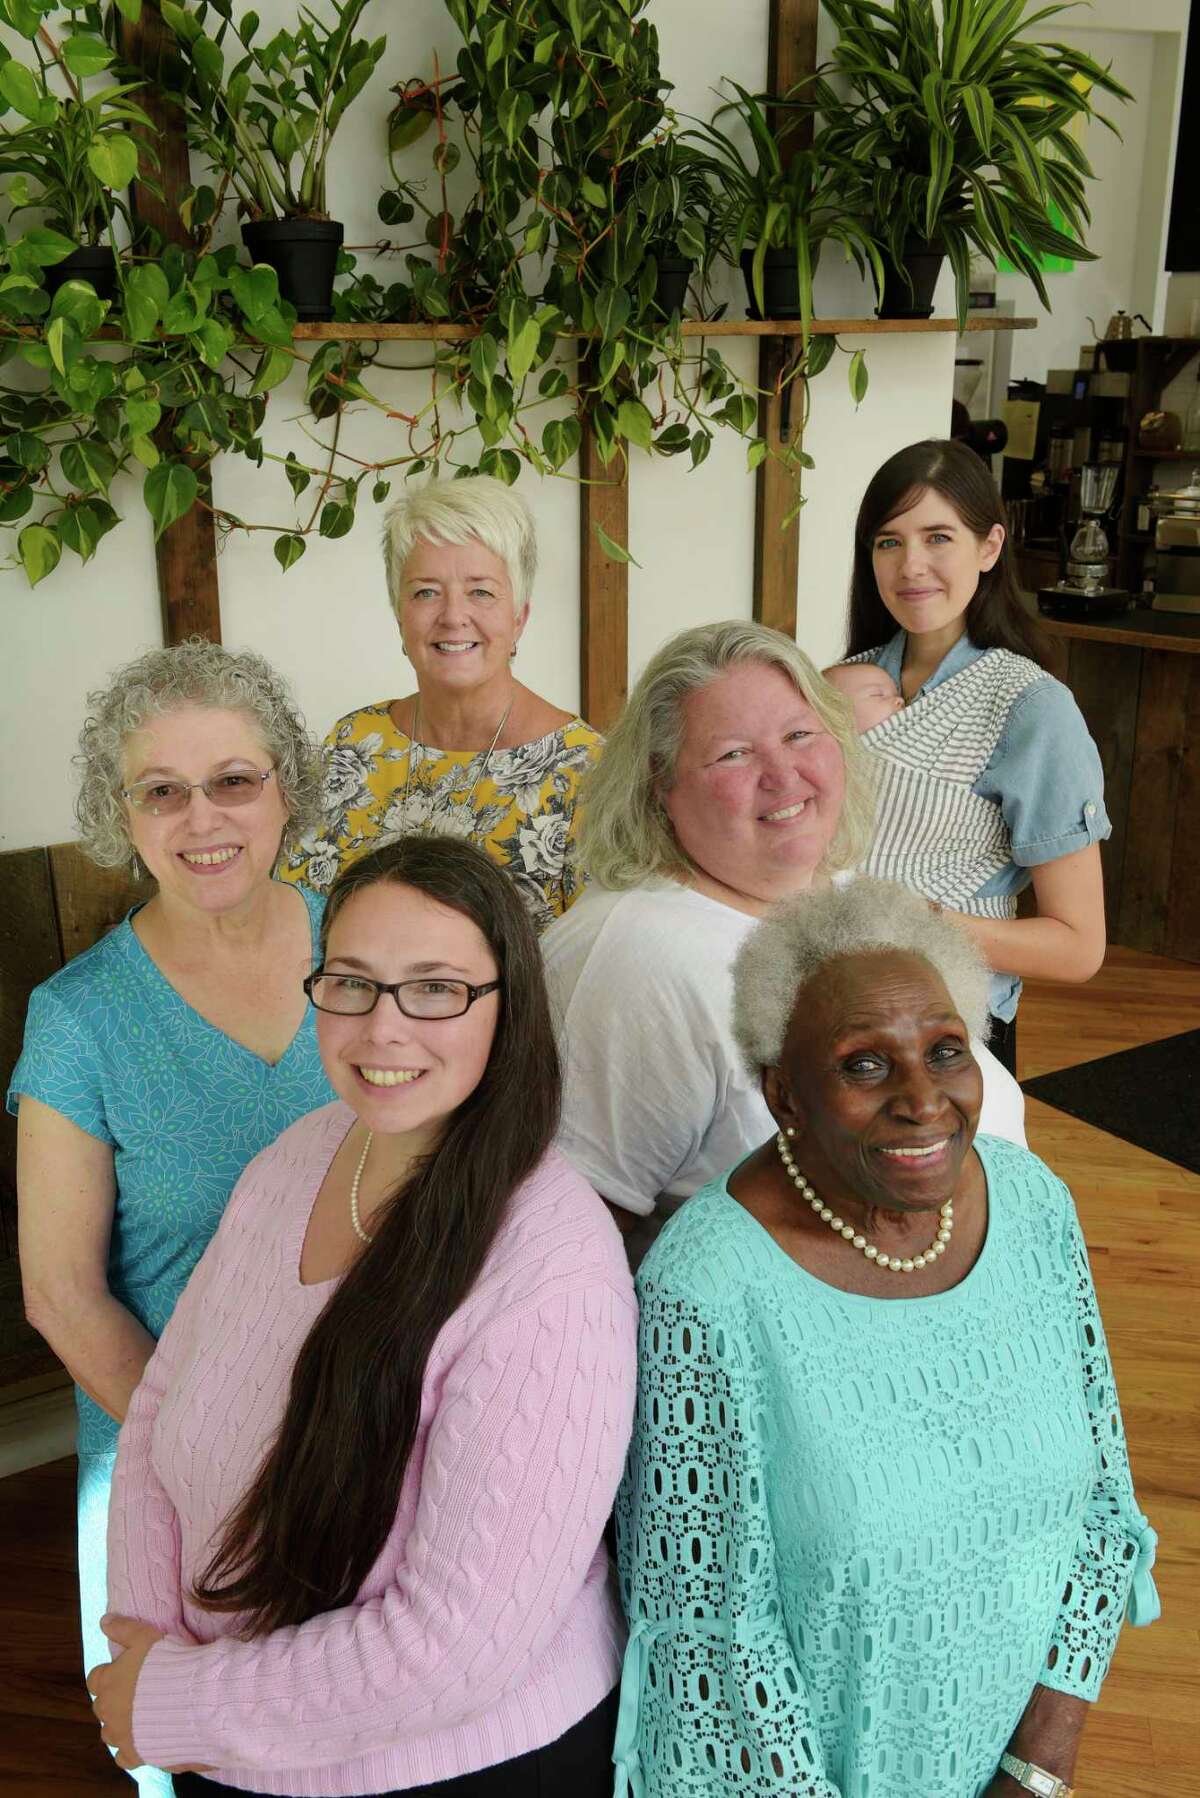 Danielle Sanzone, front left, Ada Kinsey, front right, Cecile Kowalski, middle left, Mary Beth Clancy-Halayko, middle right, Megan O'Toole, background left, and Caroline Corrigan with her son, Graham Watkins pose for a photo on Thursday, Sept. 28, 2017, at Stacks Espresso Bar in Albany, N.Y. (Paul Buckowski / Times Union)